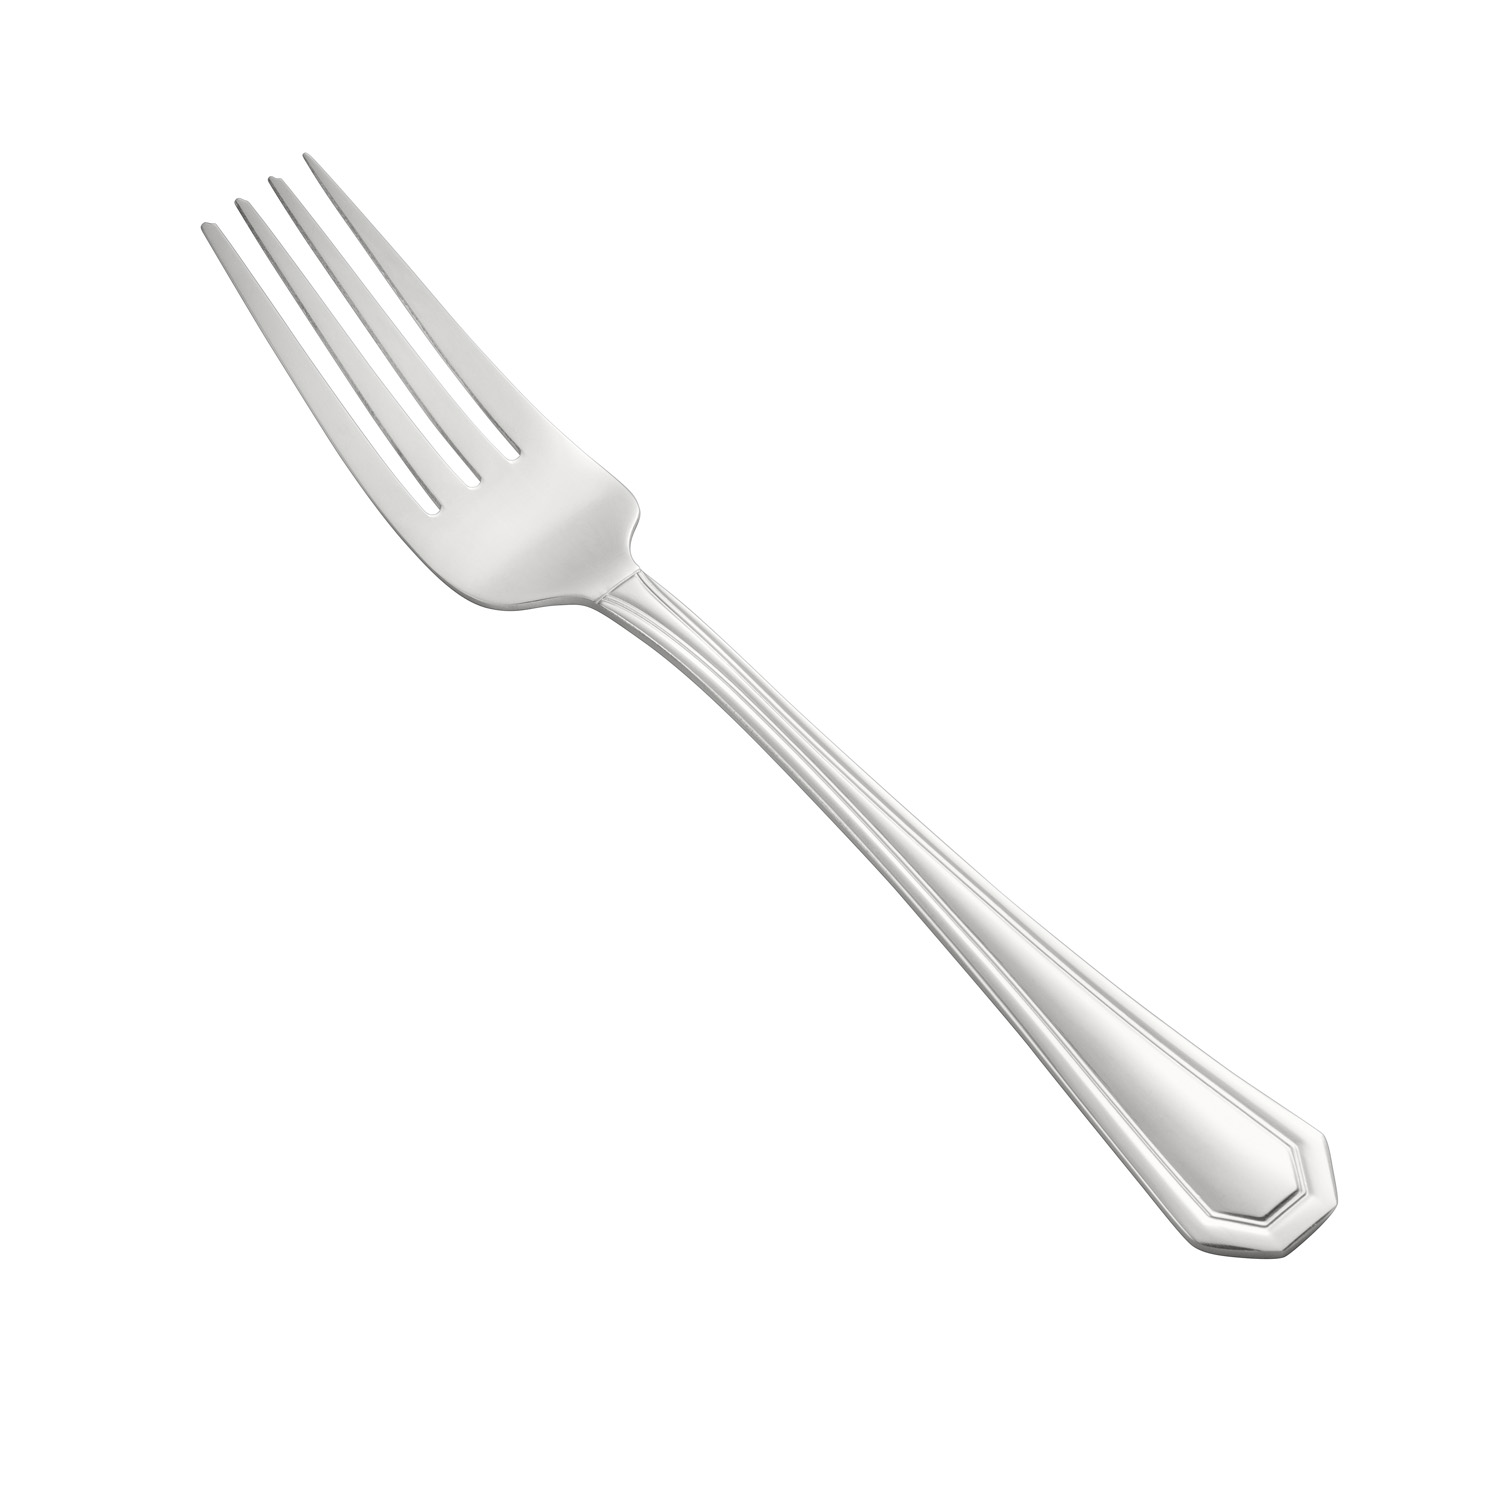 CAC China 8006-11 Lux Table Fork, Extra Heavy Weight 18/8, 8 1/4" - 1 dozen